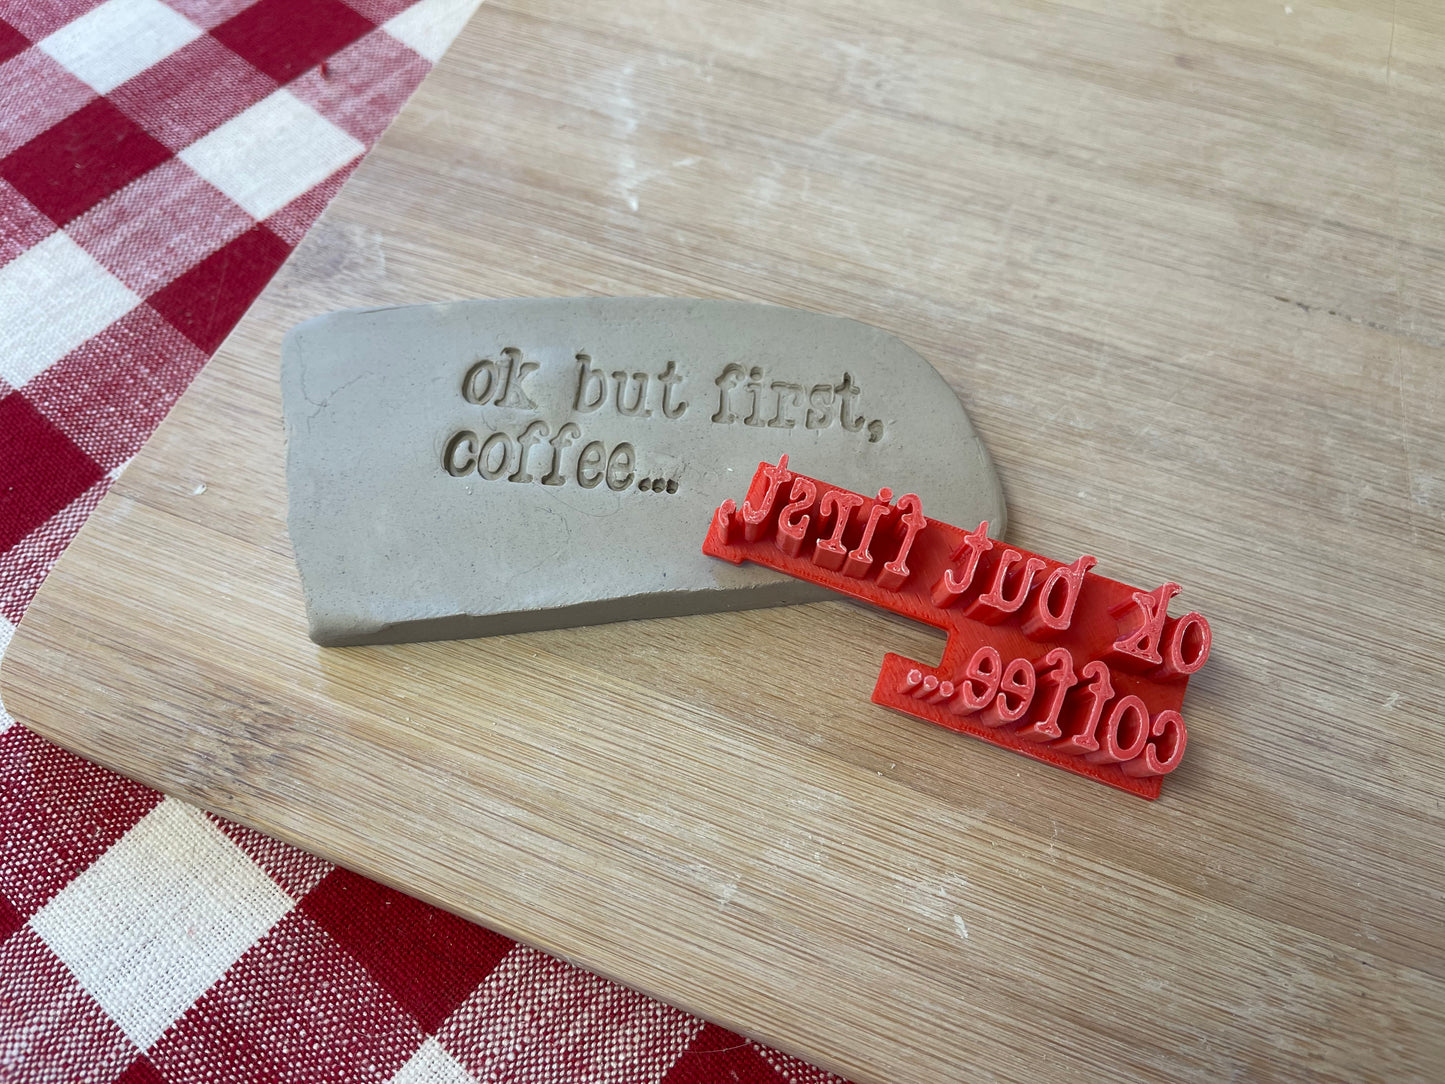 "Ok but first, coffee.." word stamp - plastic 3D printed, multiple sizes